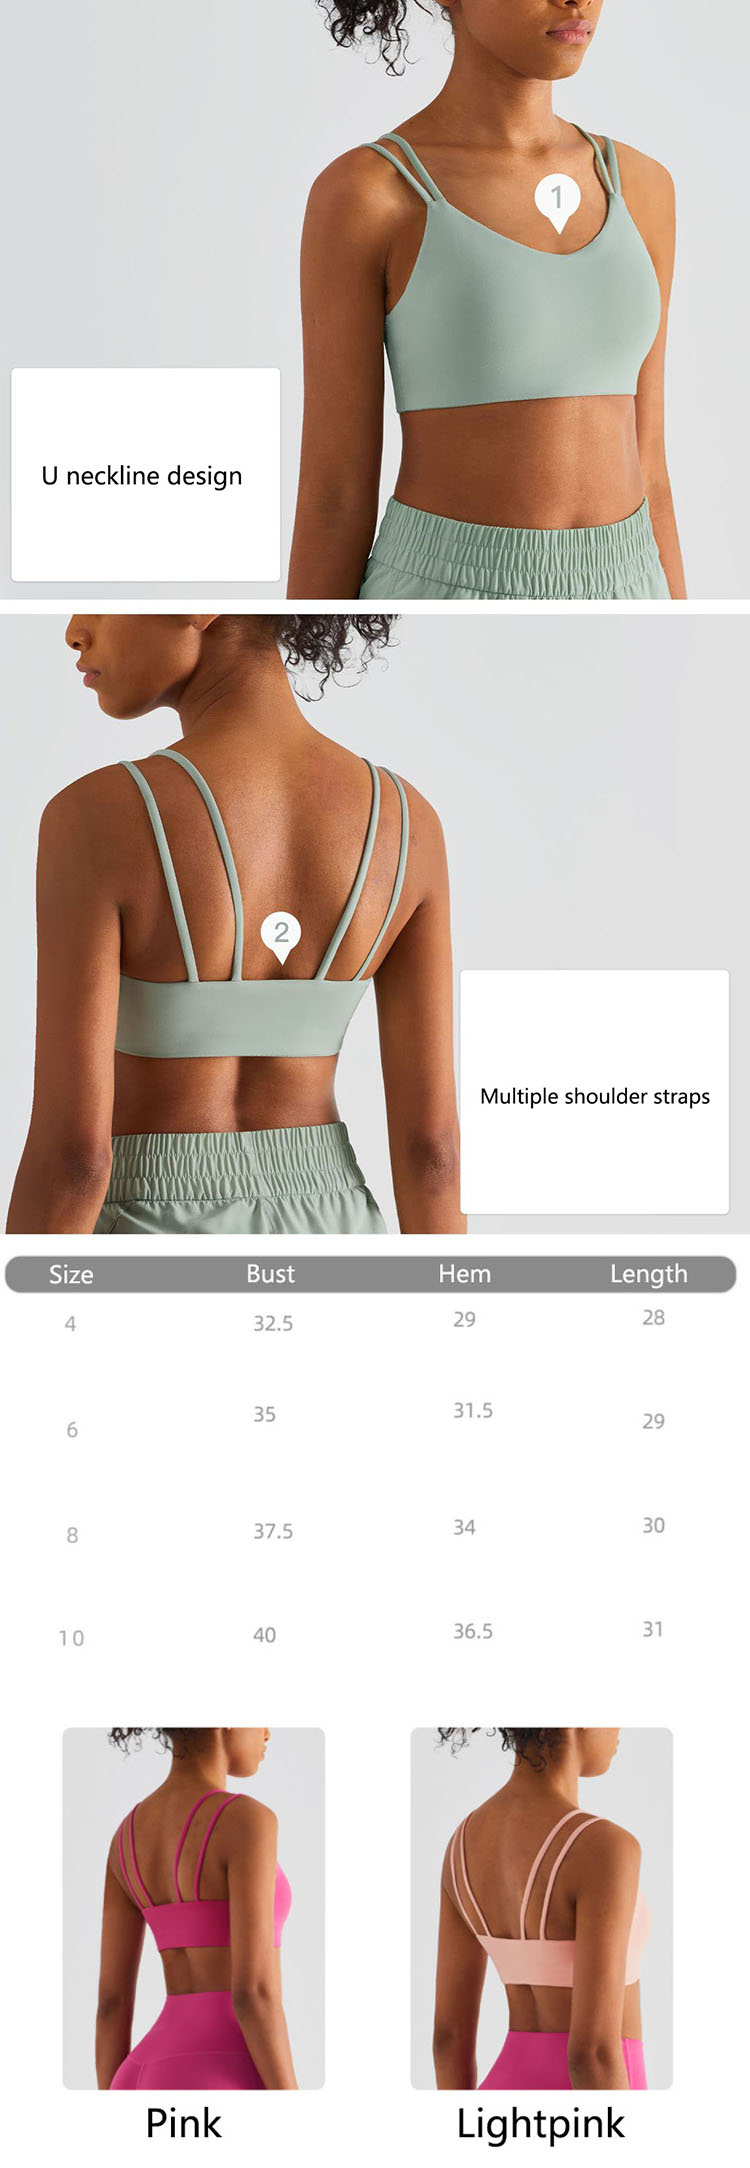 Workout tops with built in bra with balance between stable support and good comfort is a key design element